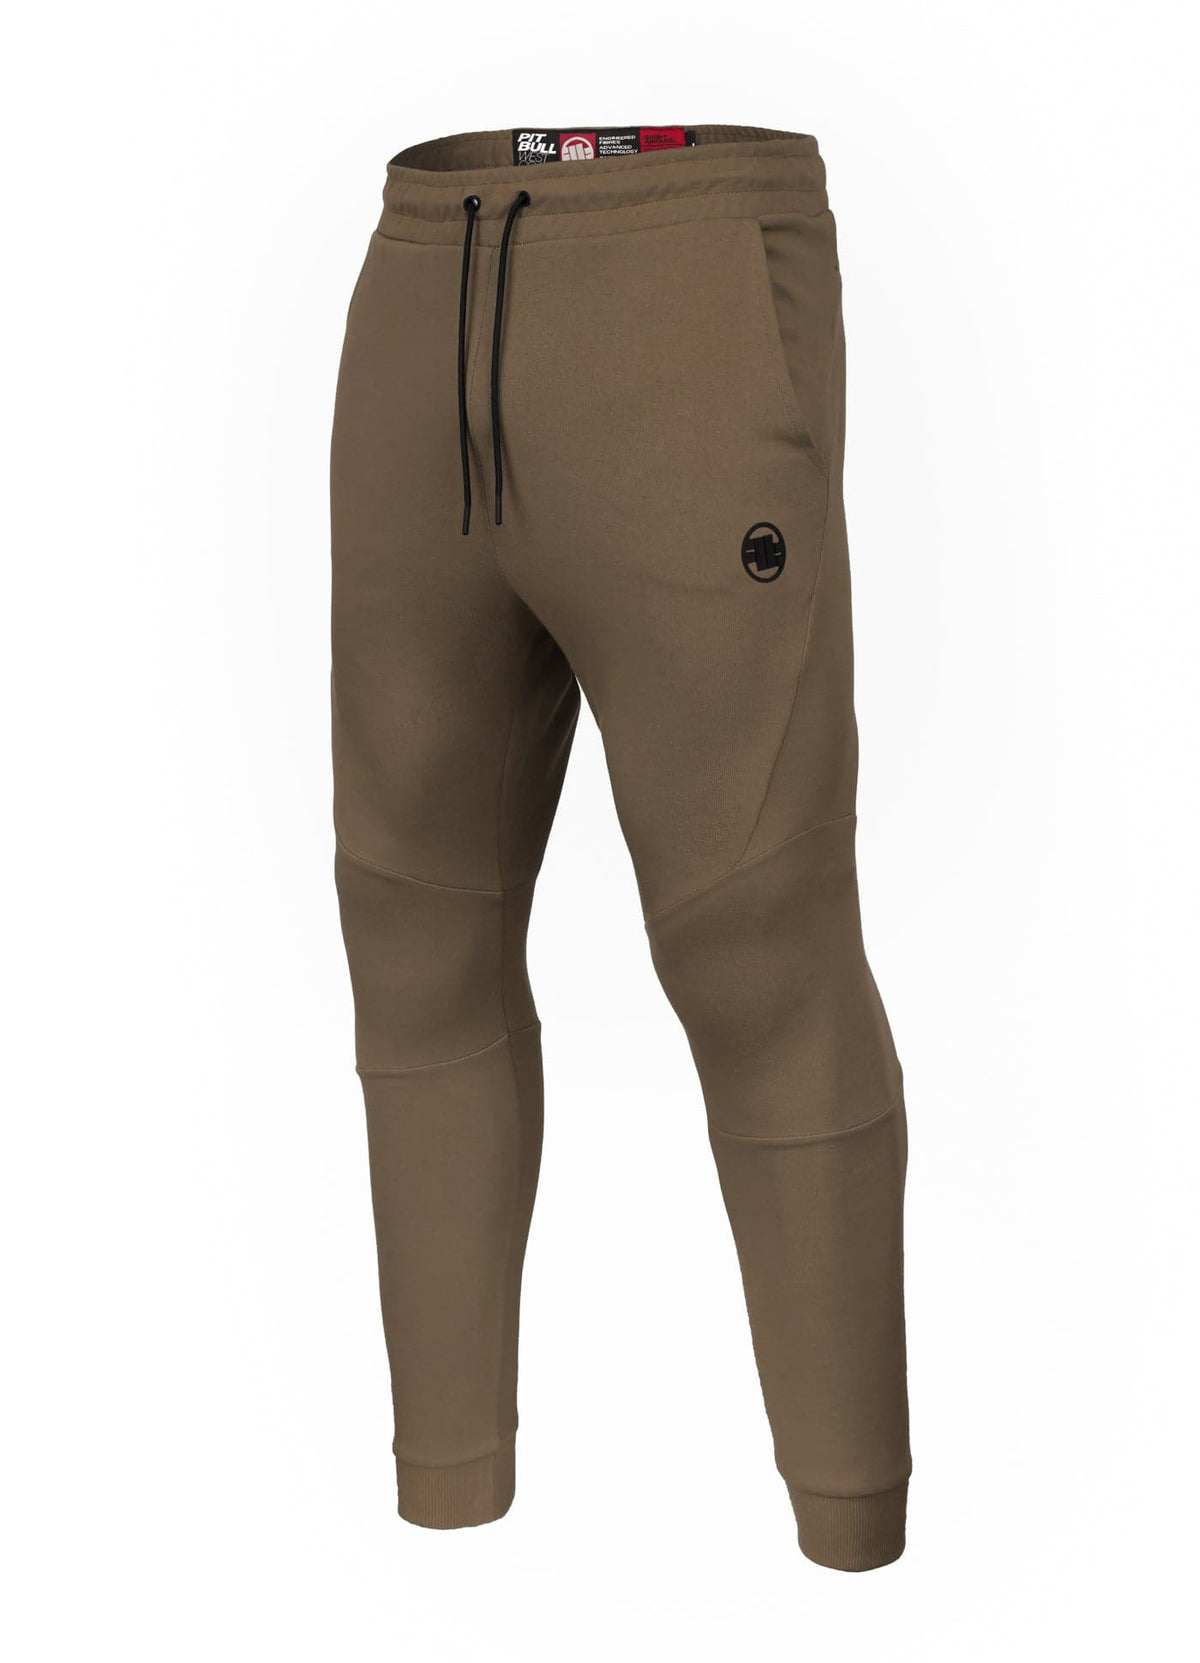 DOLPHIN Brown Jogging Pants